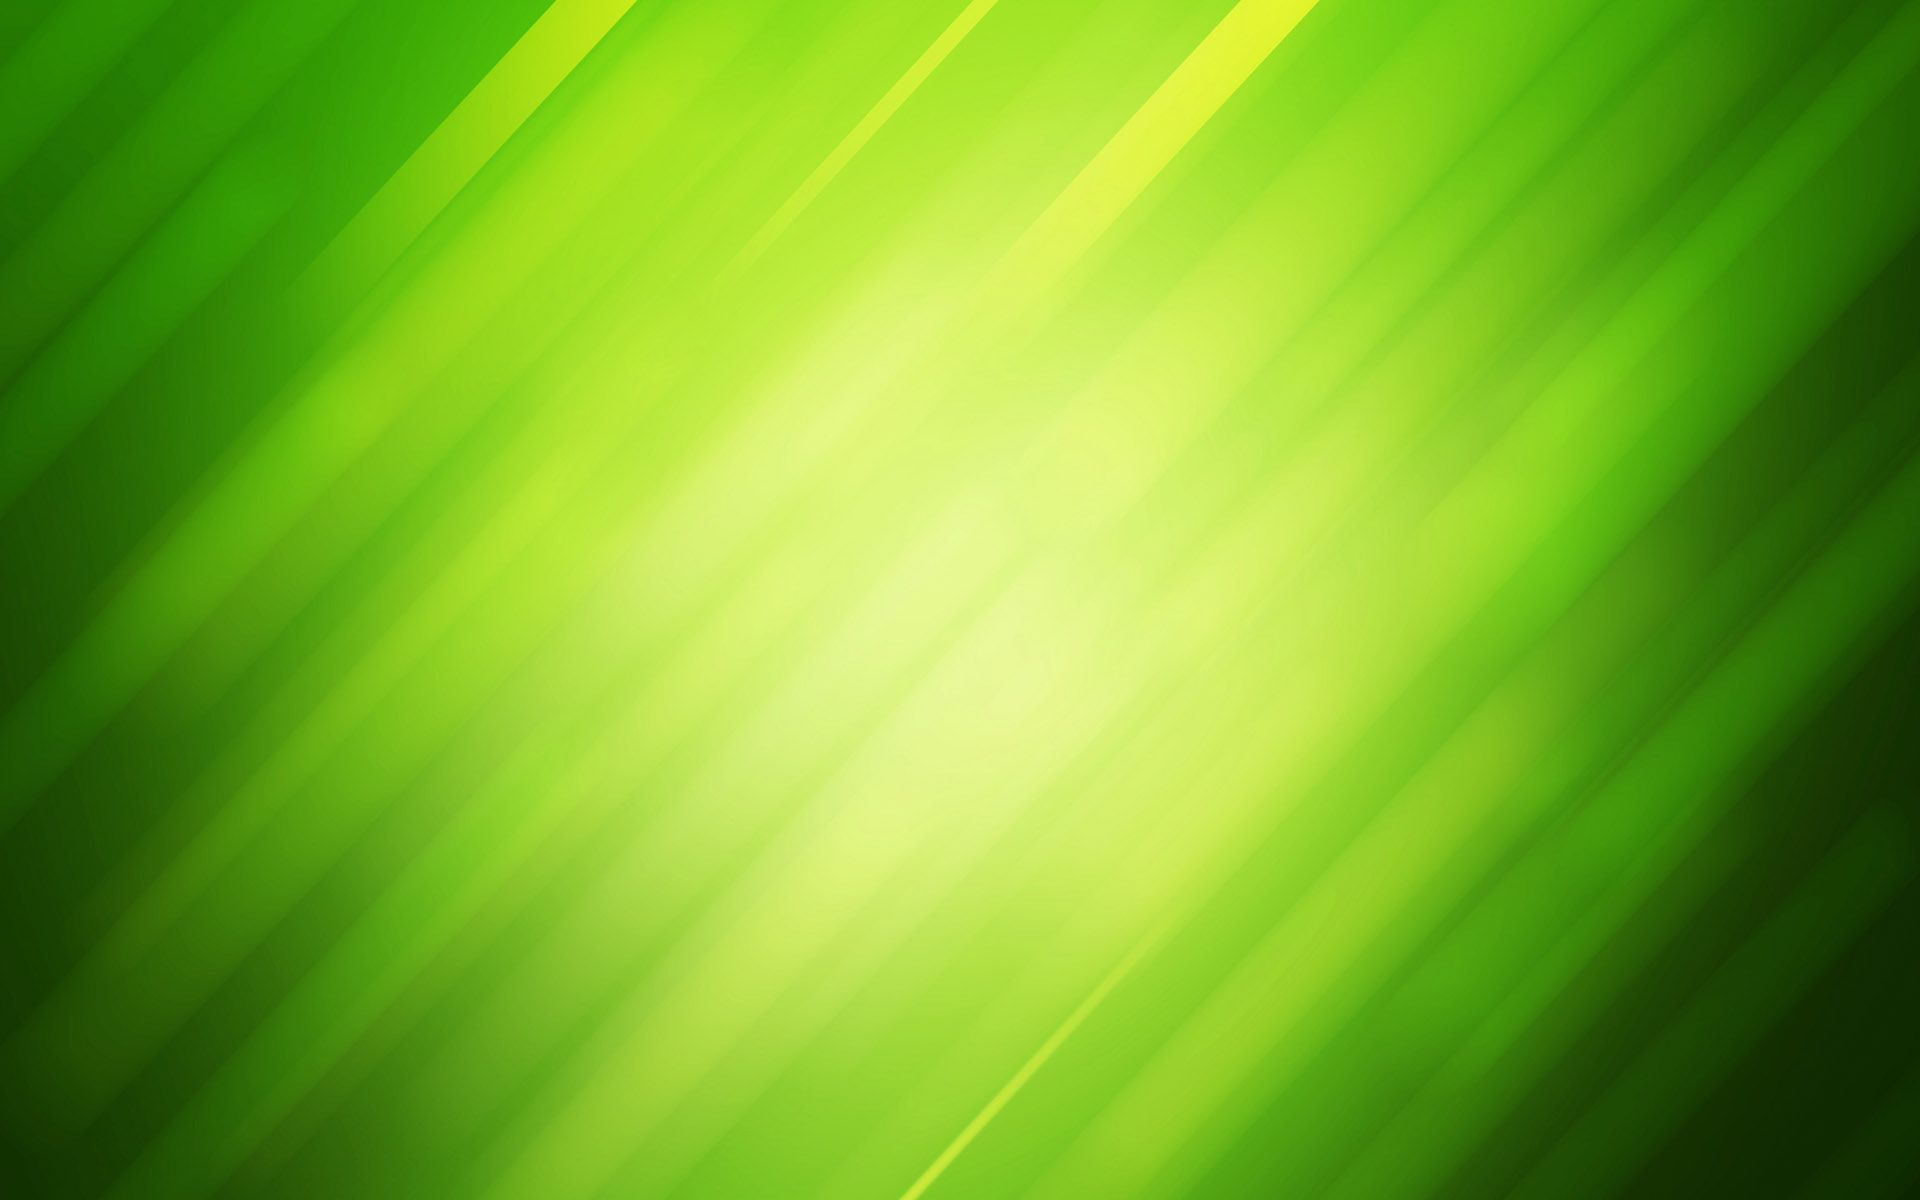 Cool green background